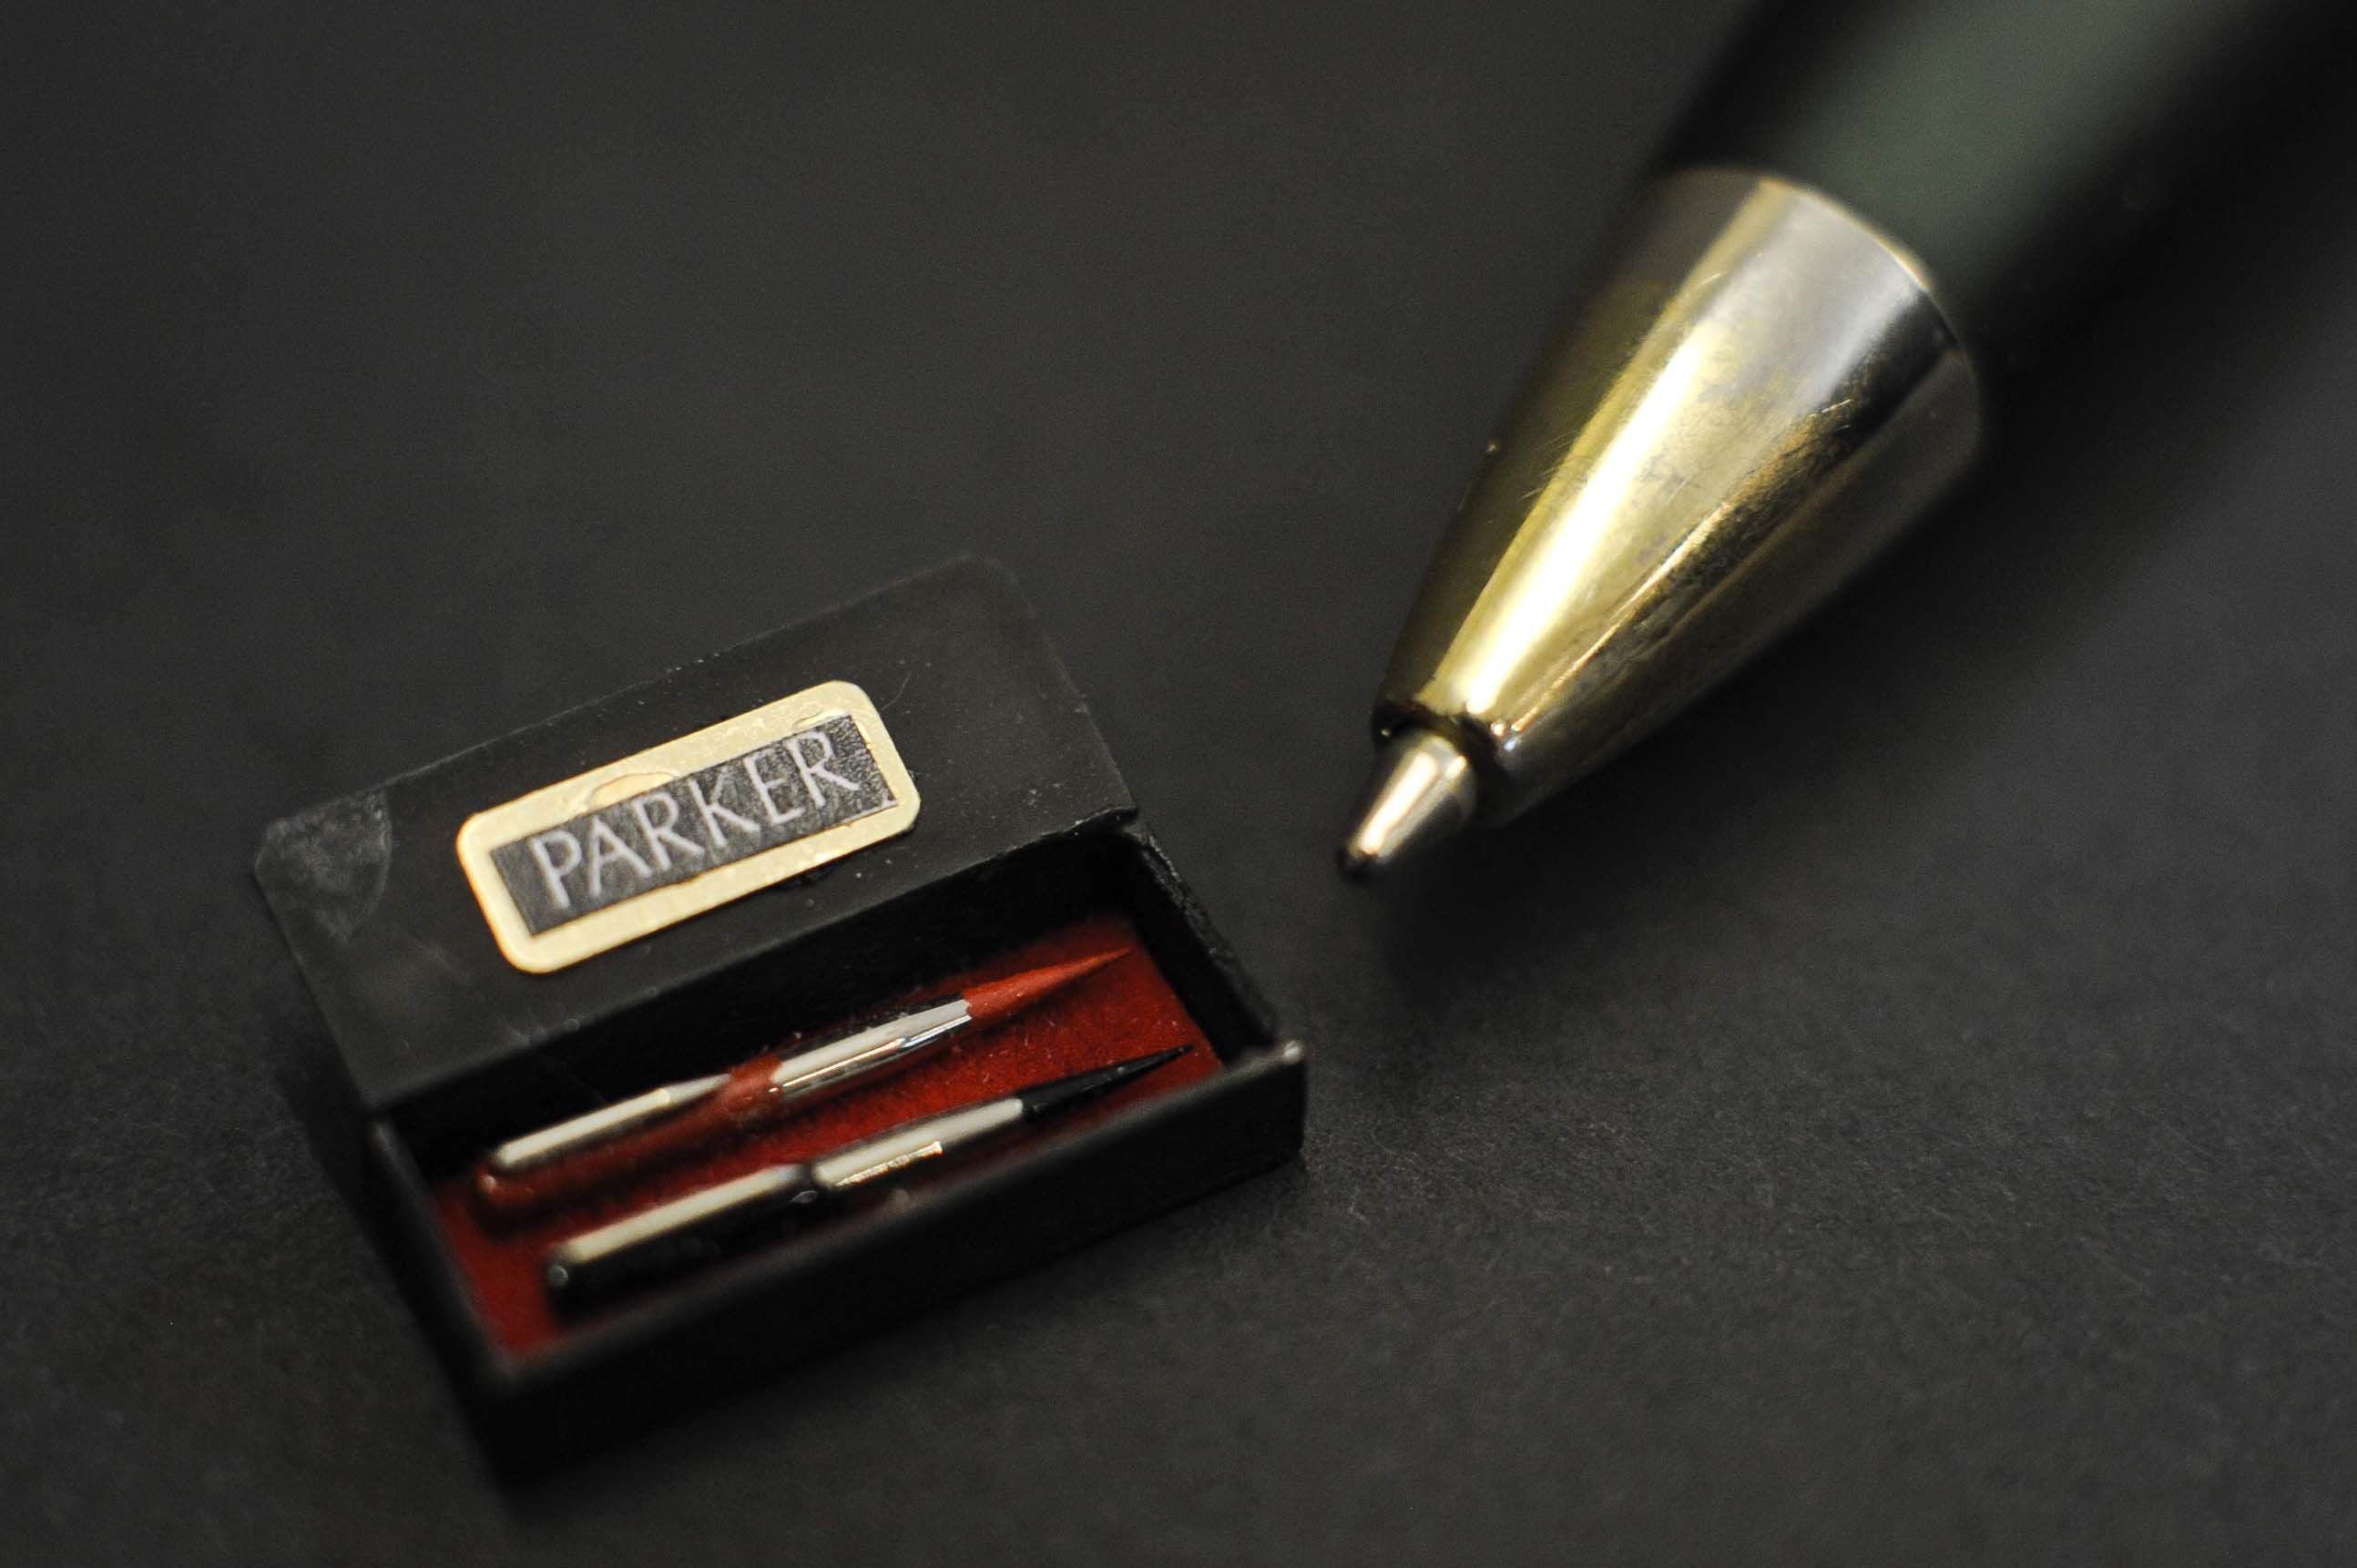 A box of 2 Parker pens, costing £9, made by Klaas Schultz of South Africa are dwarfed by the nib of a ball-point pen. PRESS ASSOCIATION Photo. Picture date: Thursday September, 29, 2011. Karon Cunningham Miniatures shop in Bath, UK, offers a wide and varied collection of miniature furniture, accessories and figurines made by some of the worlds leading miniature makers. Photo credit should read: Ben Birchall/PA Wire